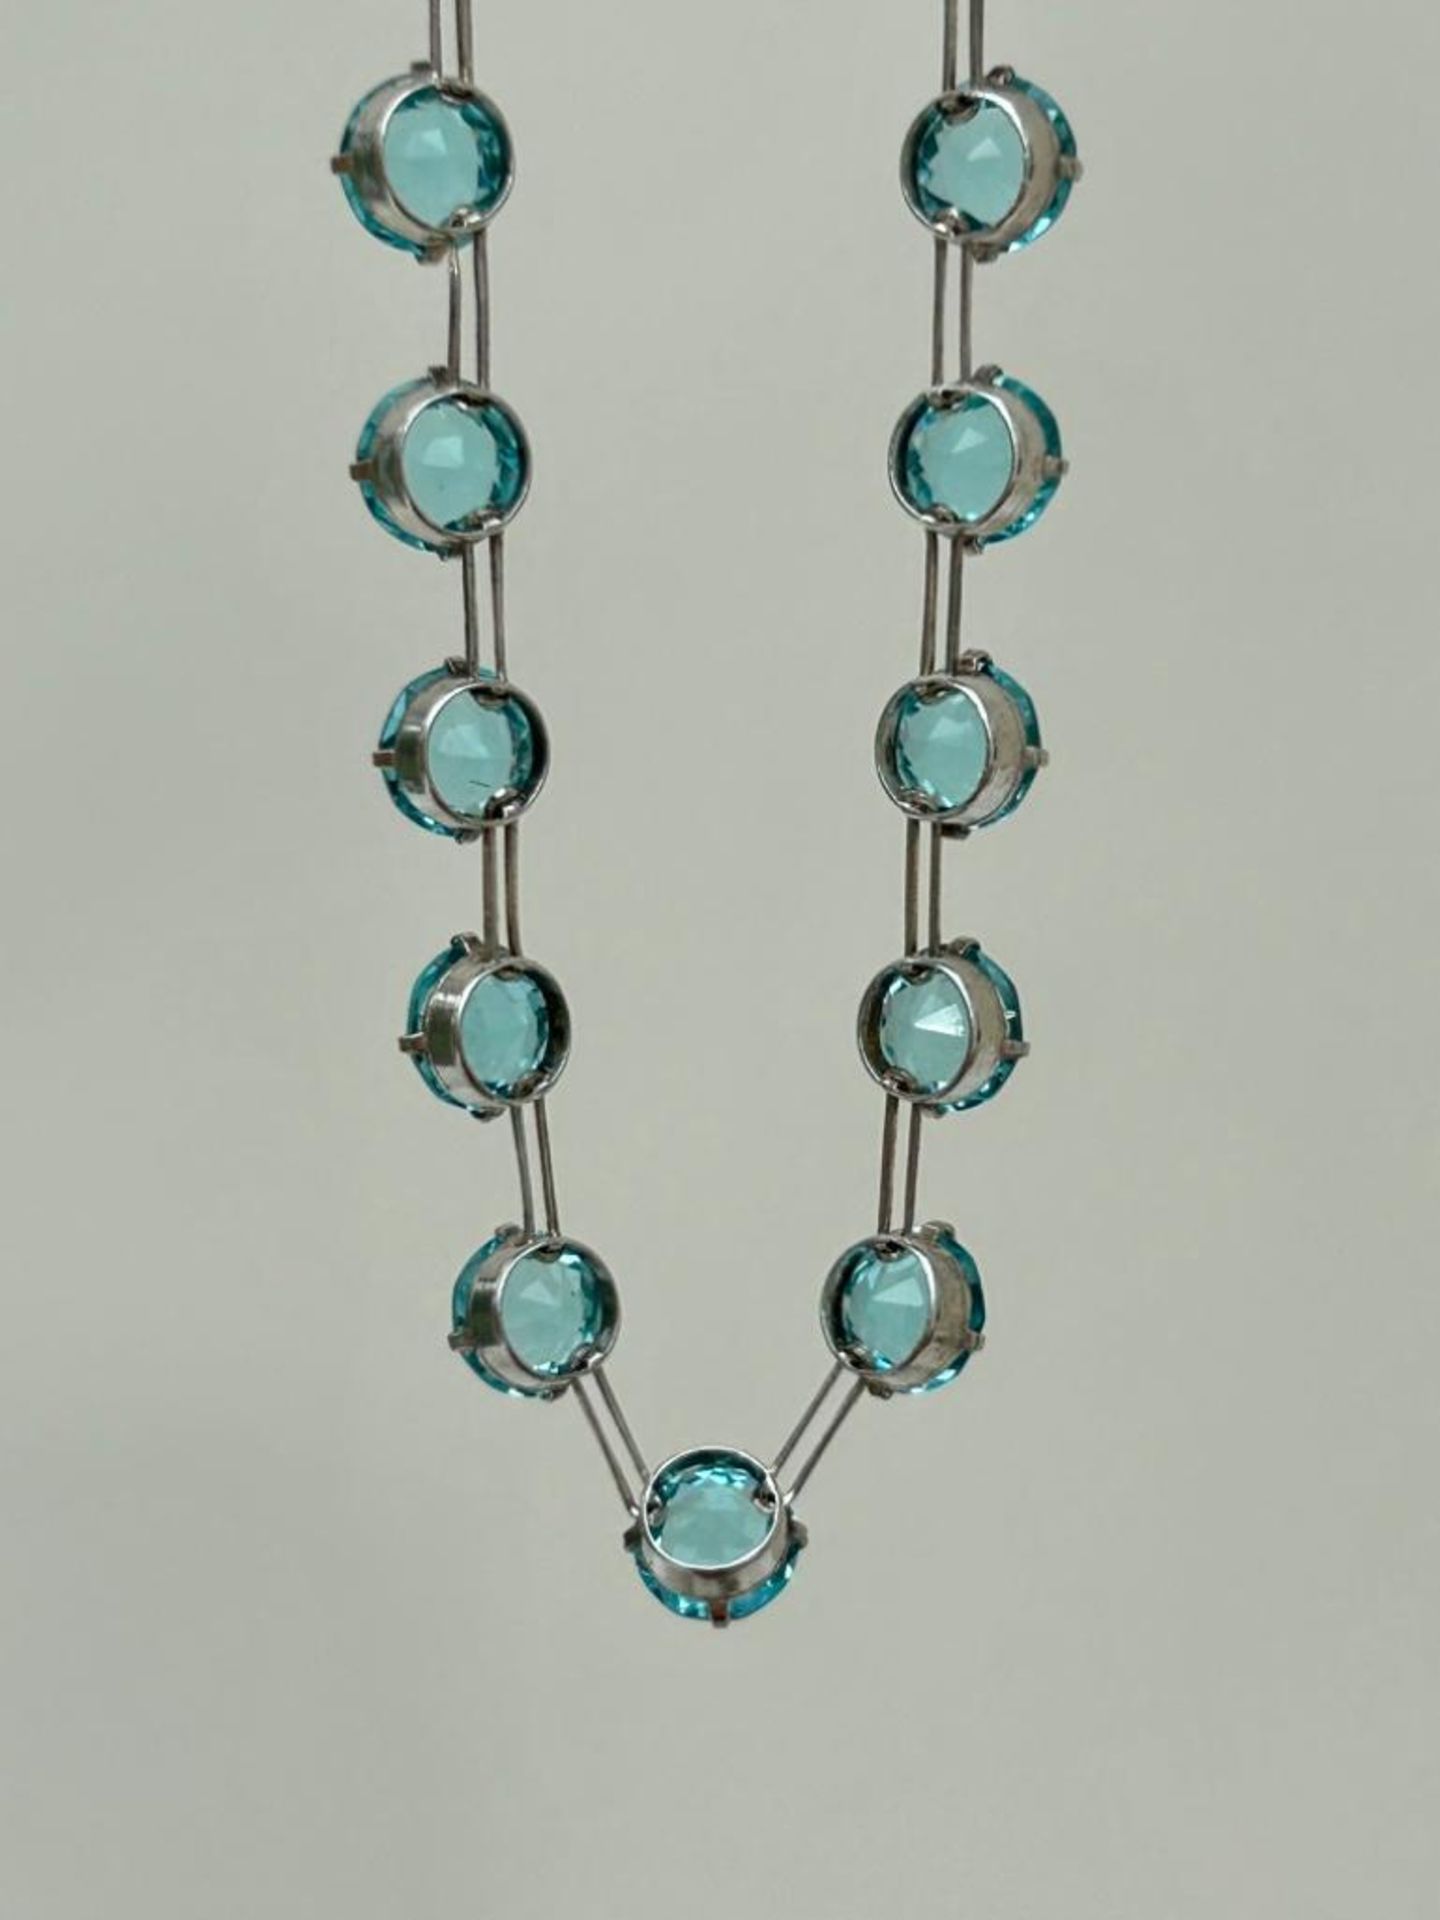 Vintage Blue Riviere Necklace in Silver - Image 4 of 4